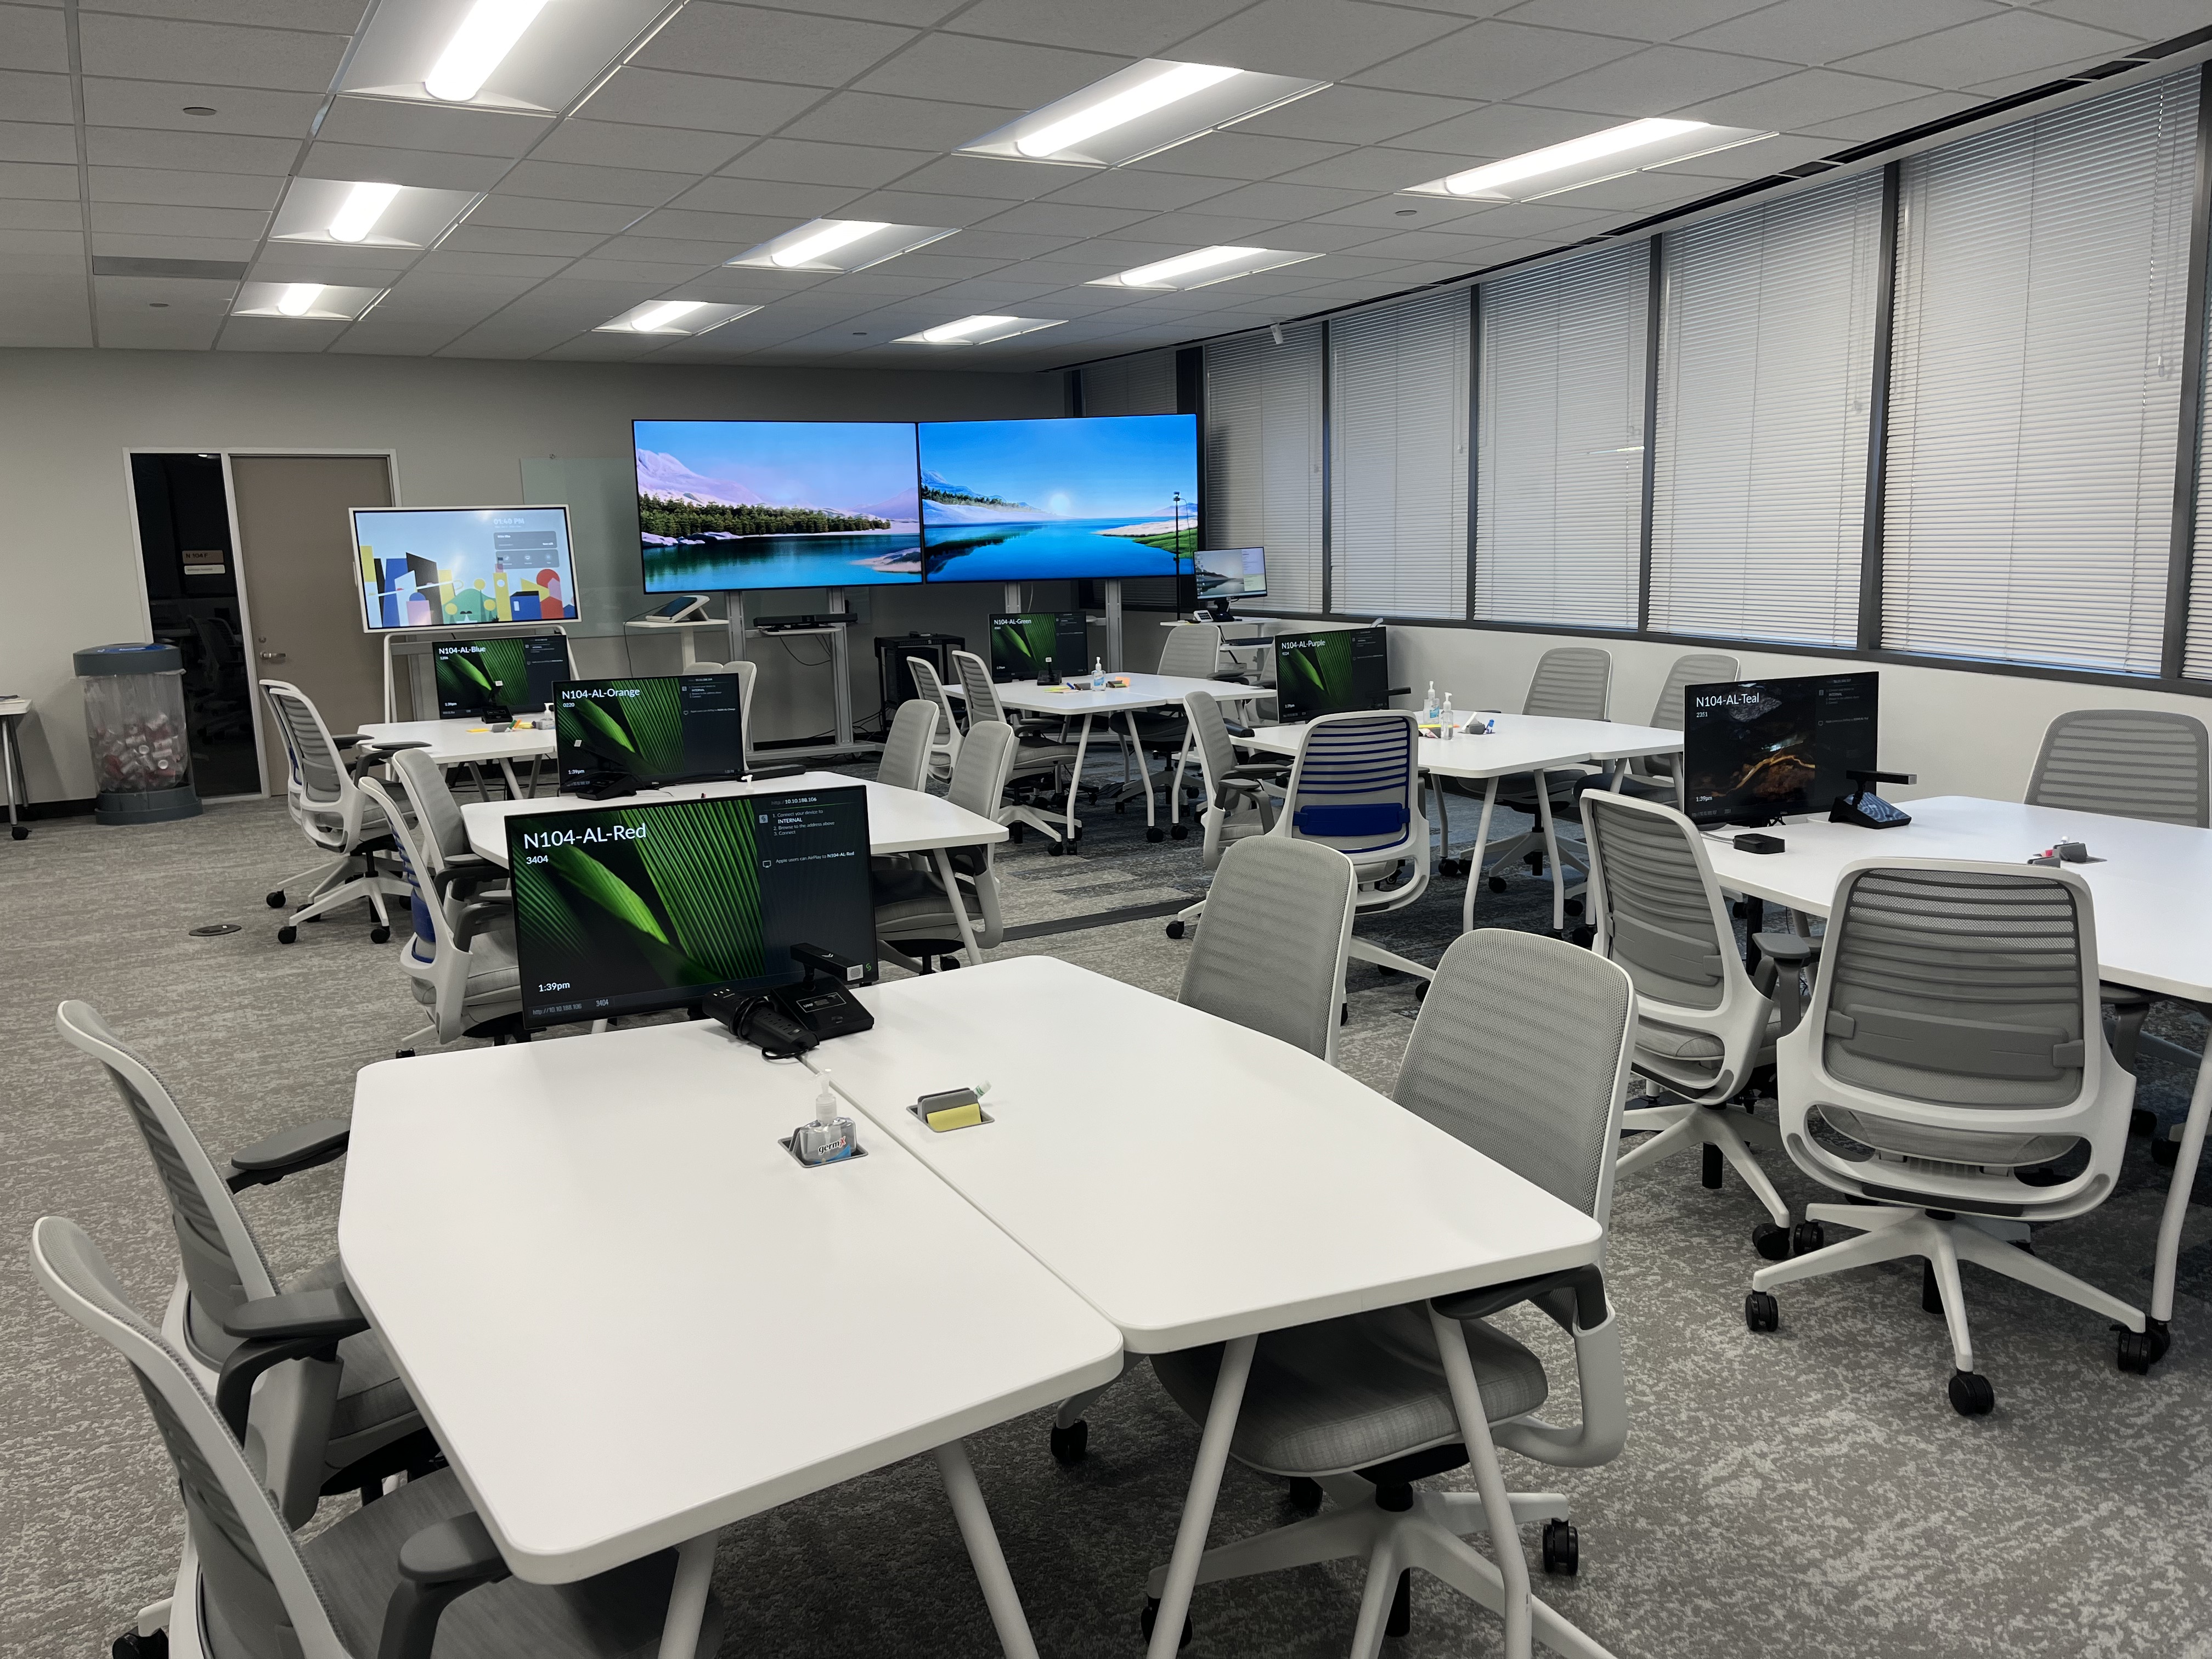 classroom with desks, screens, and a digital whiteboard